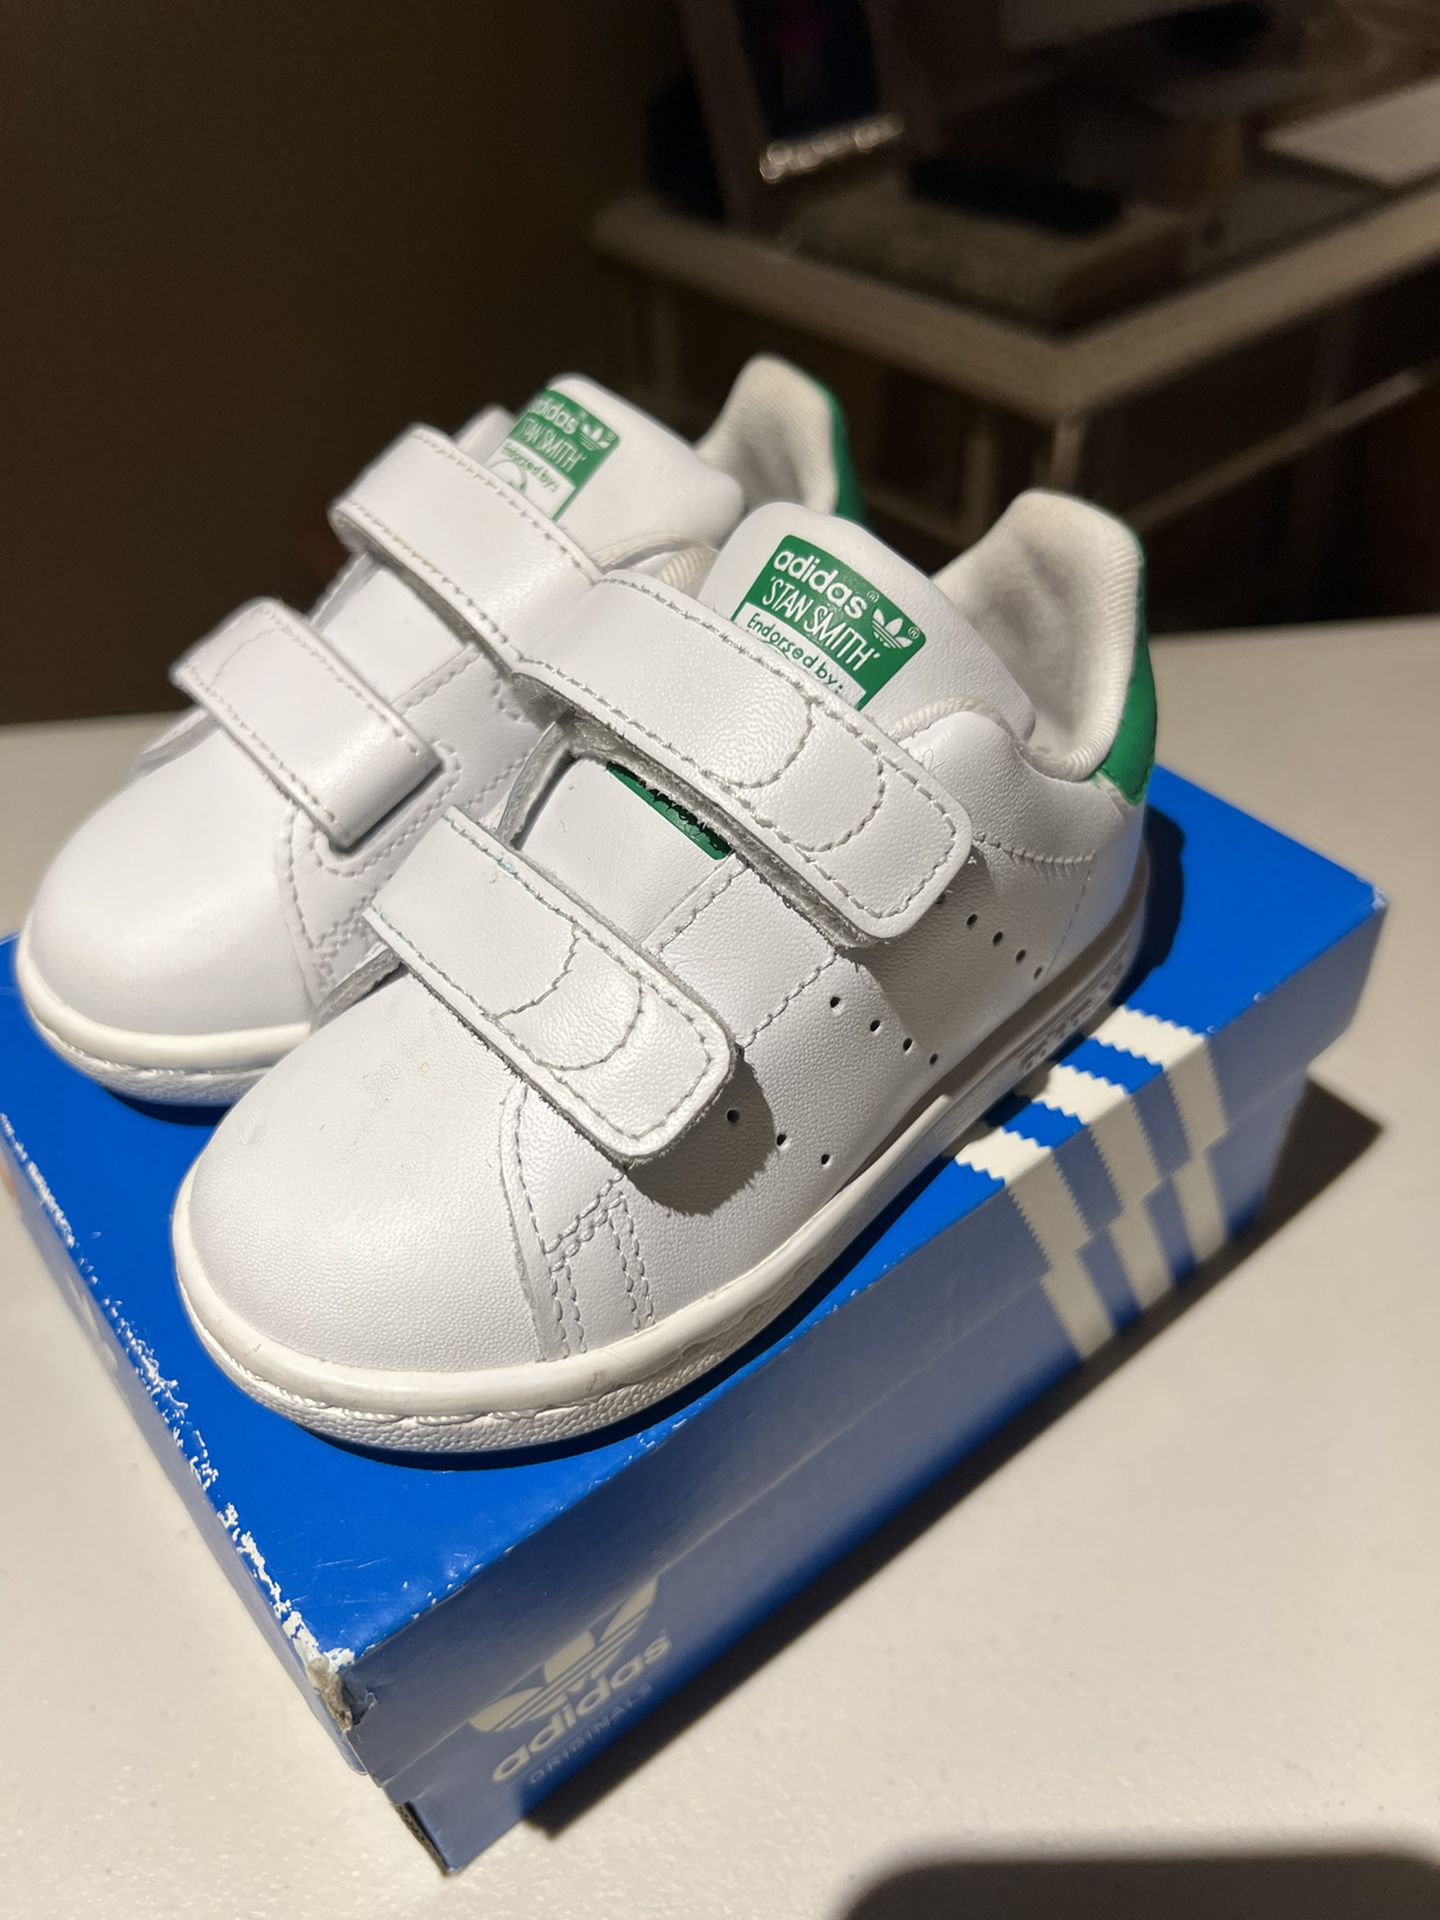 Adidas BZ0520 Infant Toddler Stan Smith CF I Baby Shoes White/Green Kids New with Box Size: US 5.5K for Sale Rockville Centre, NY -